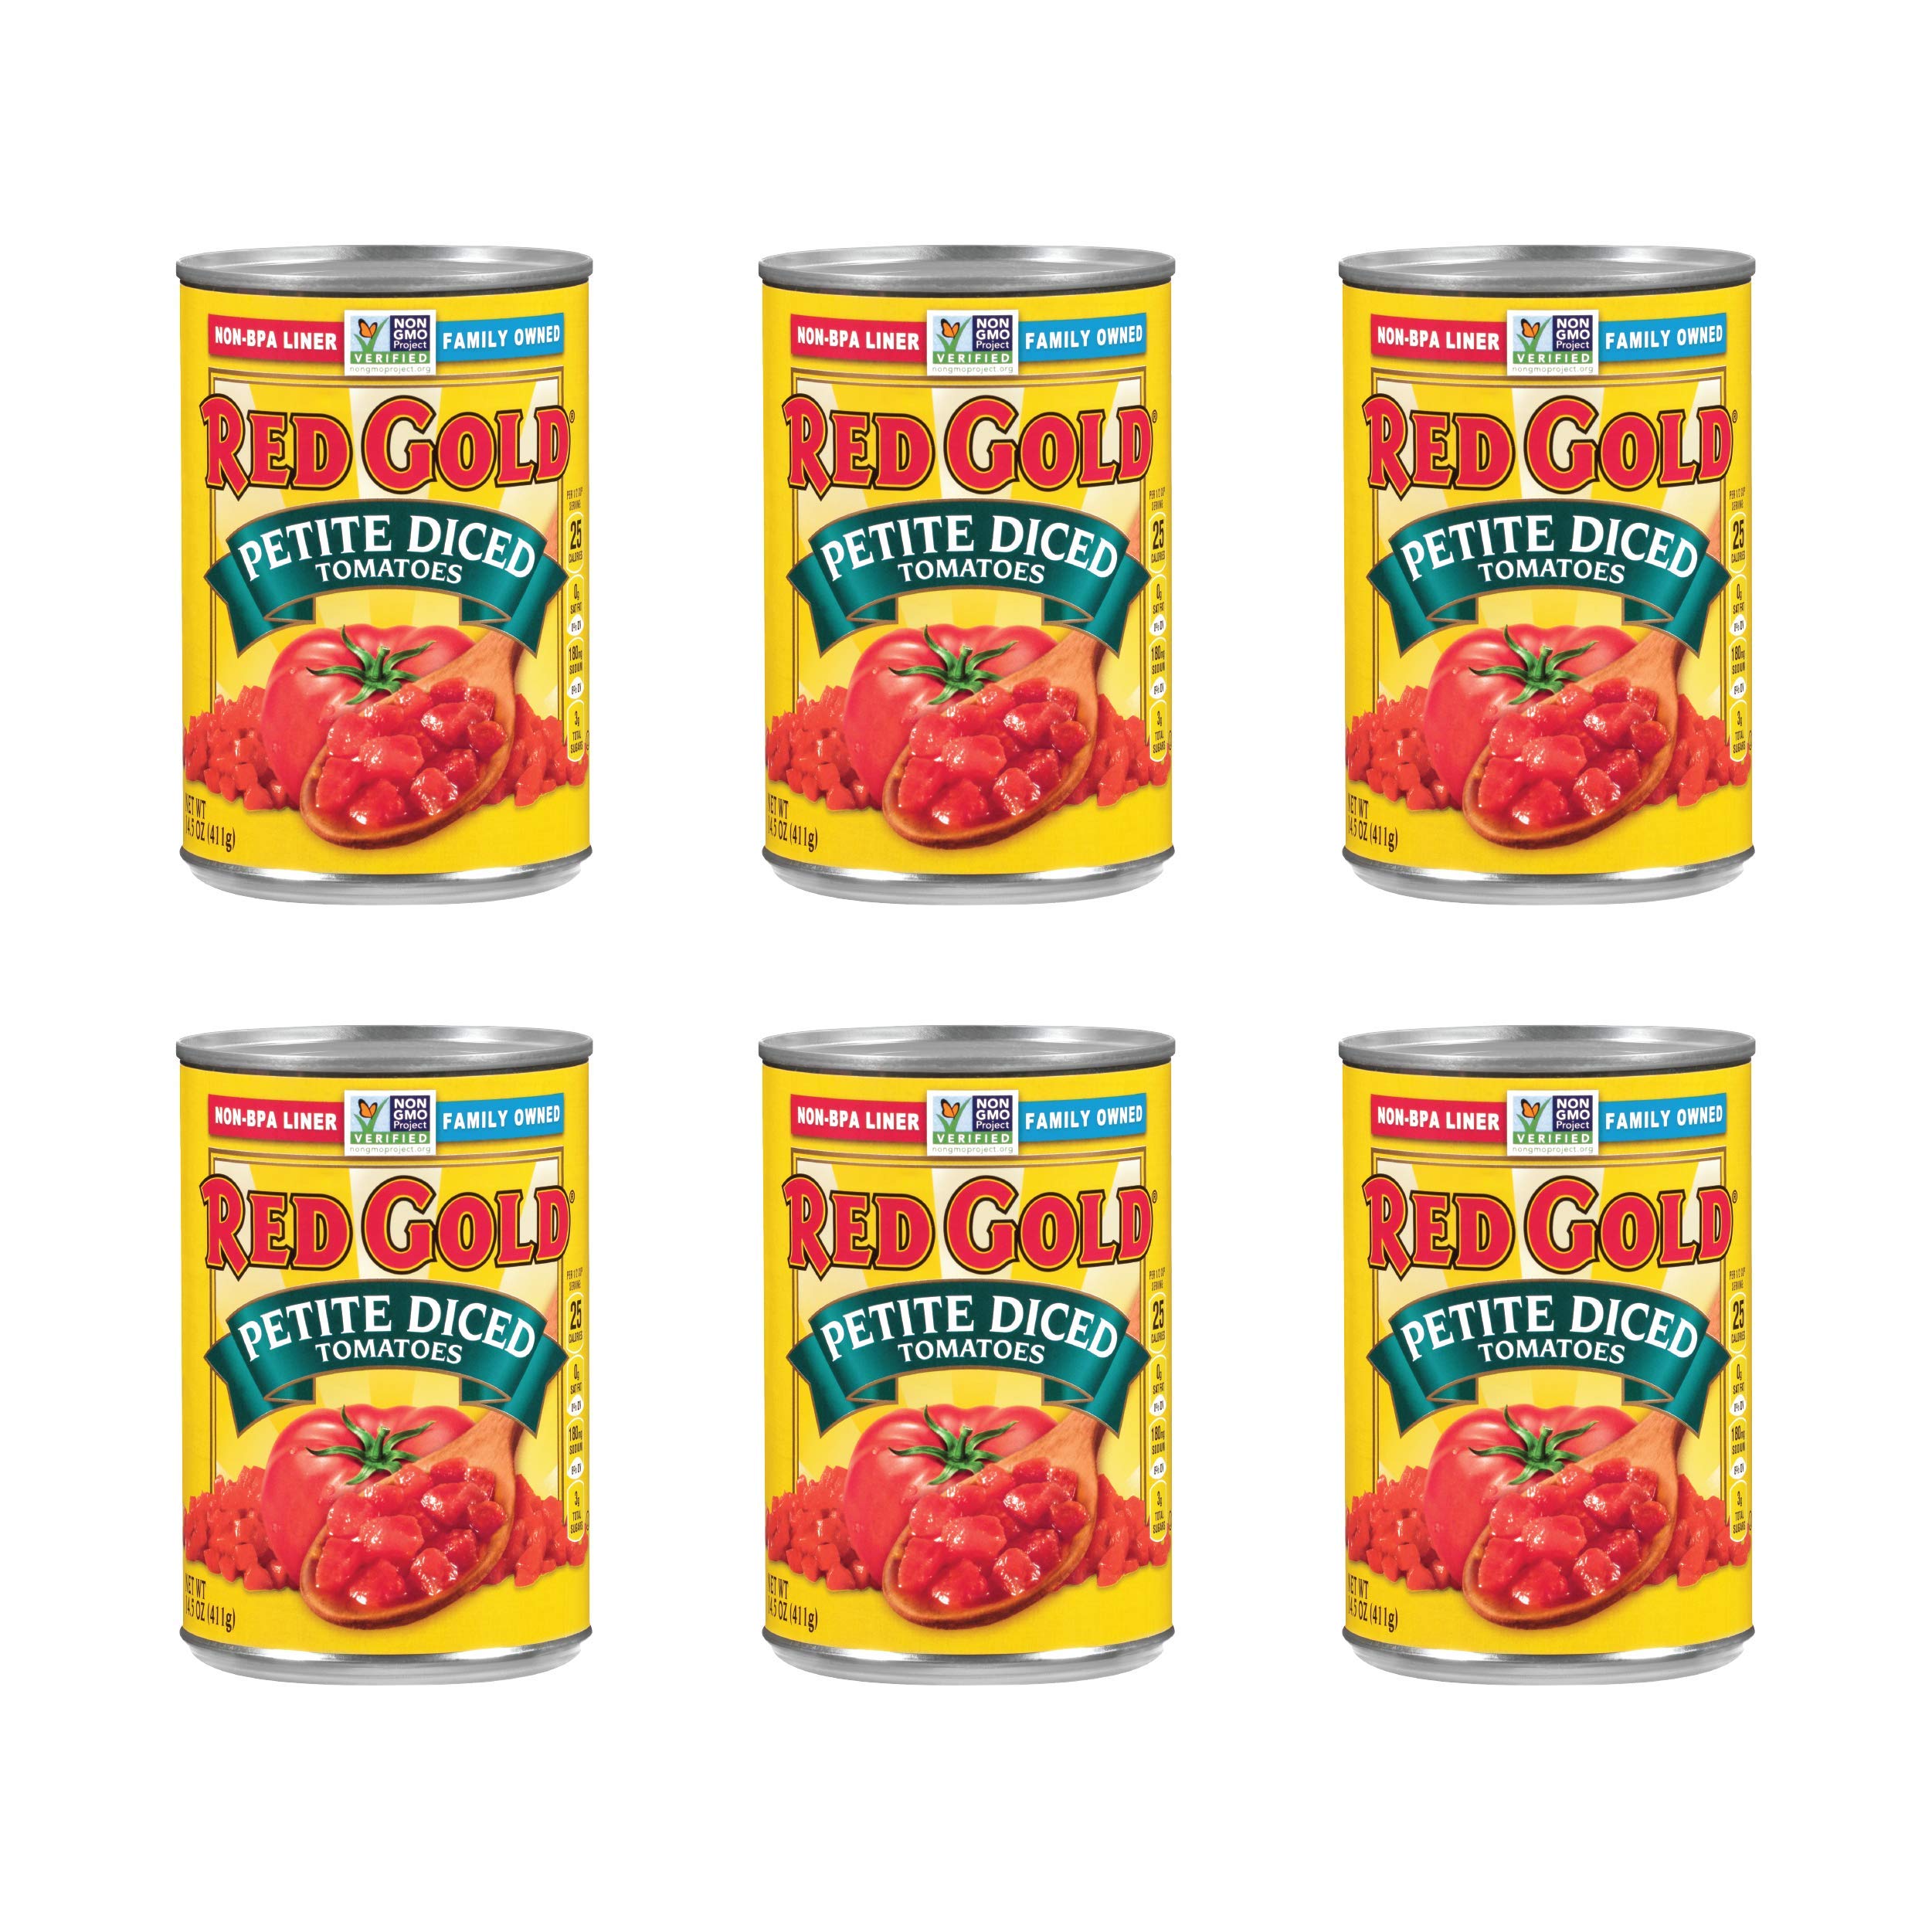 Red Gold Petite Diced Tomatoes, Kosher and Gluten Free, 14.5 Ounce Cans, 6-Pack